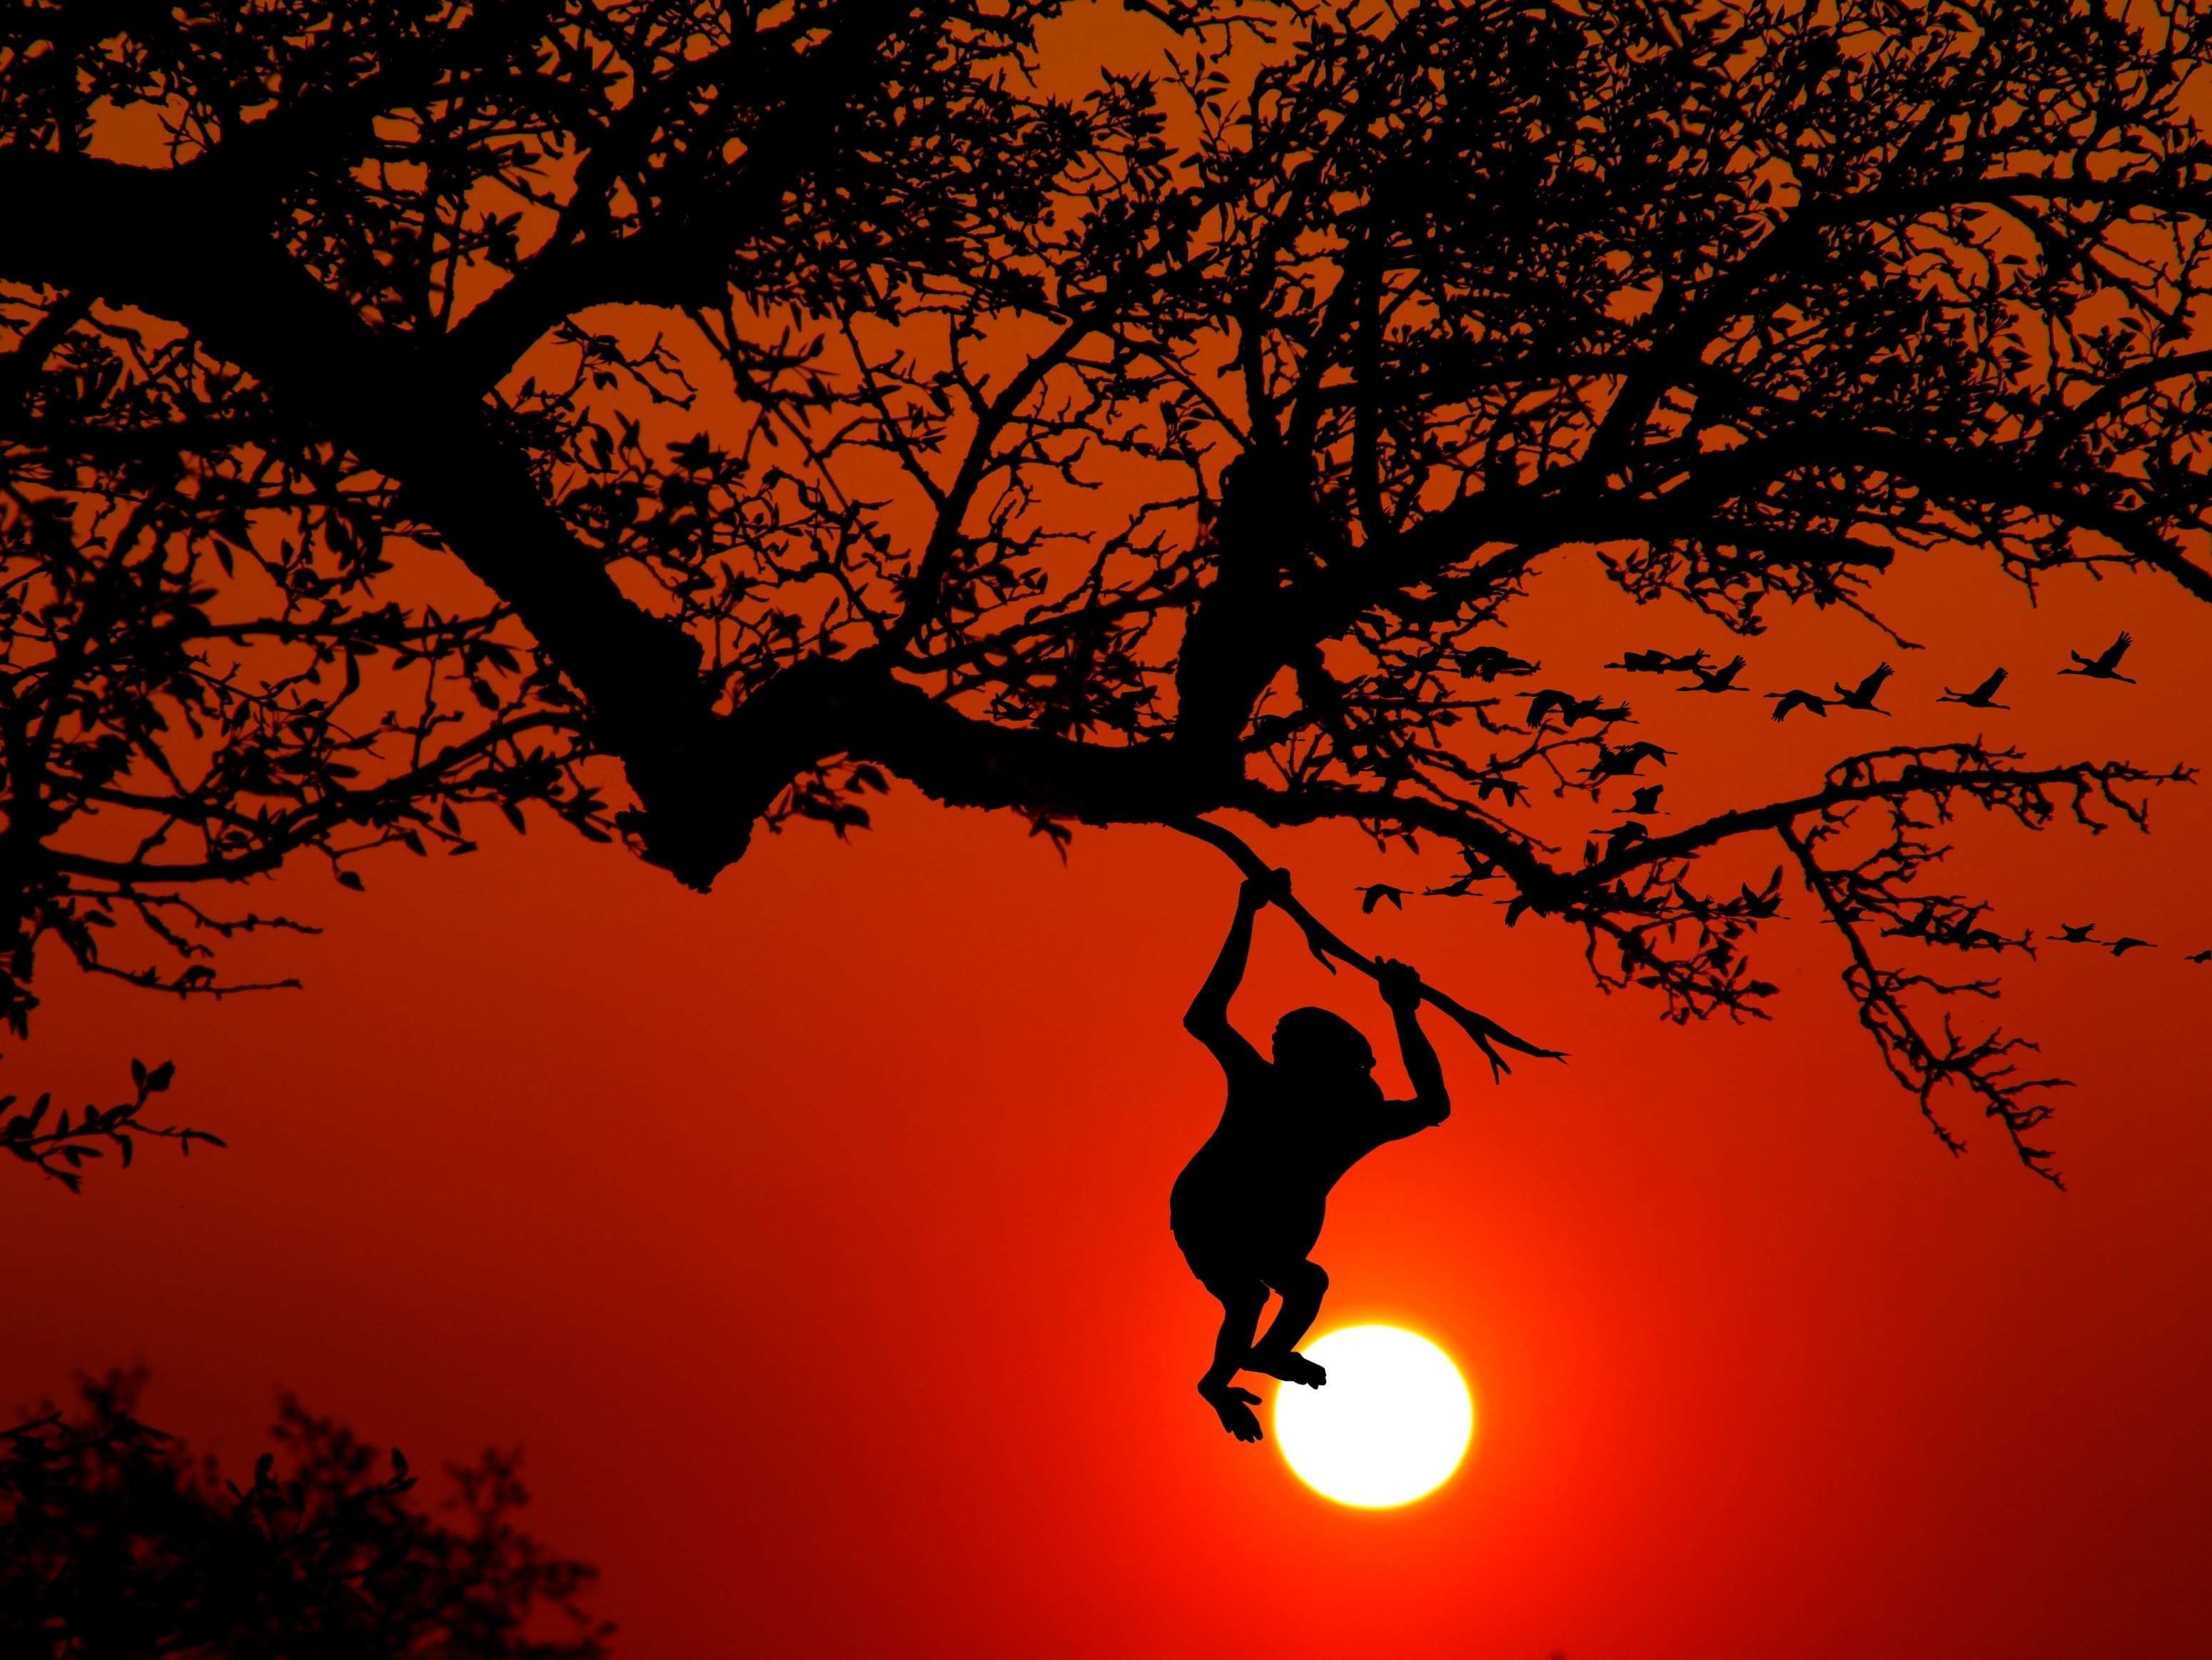 A person swinging on the branch of tree - Jungle, red